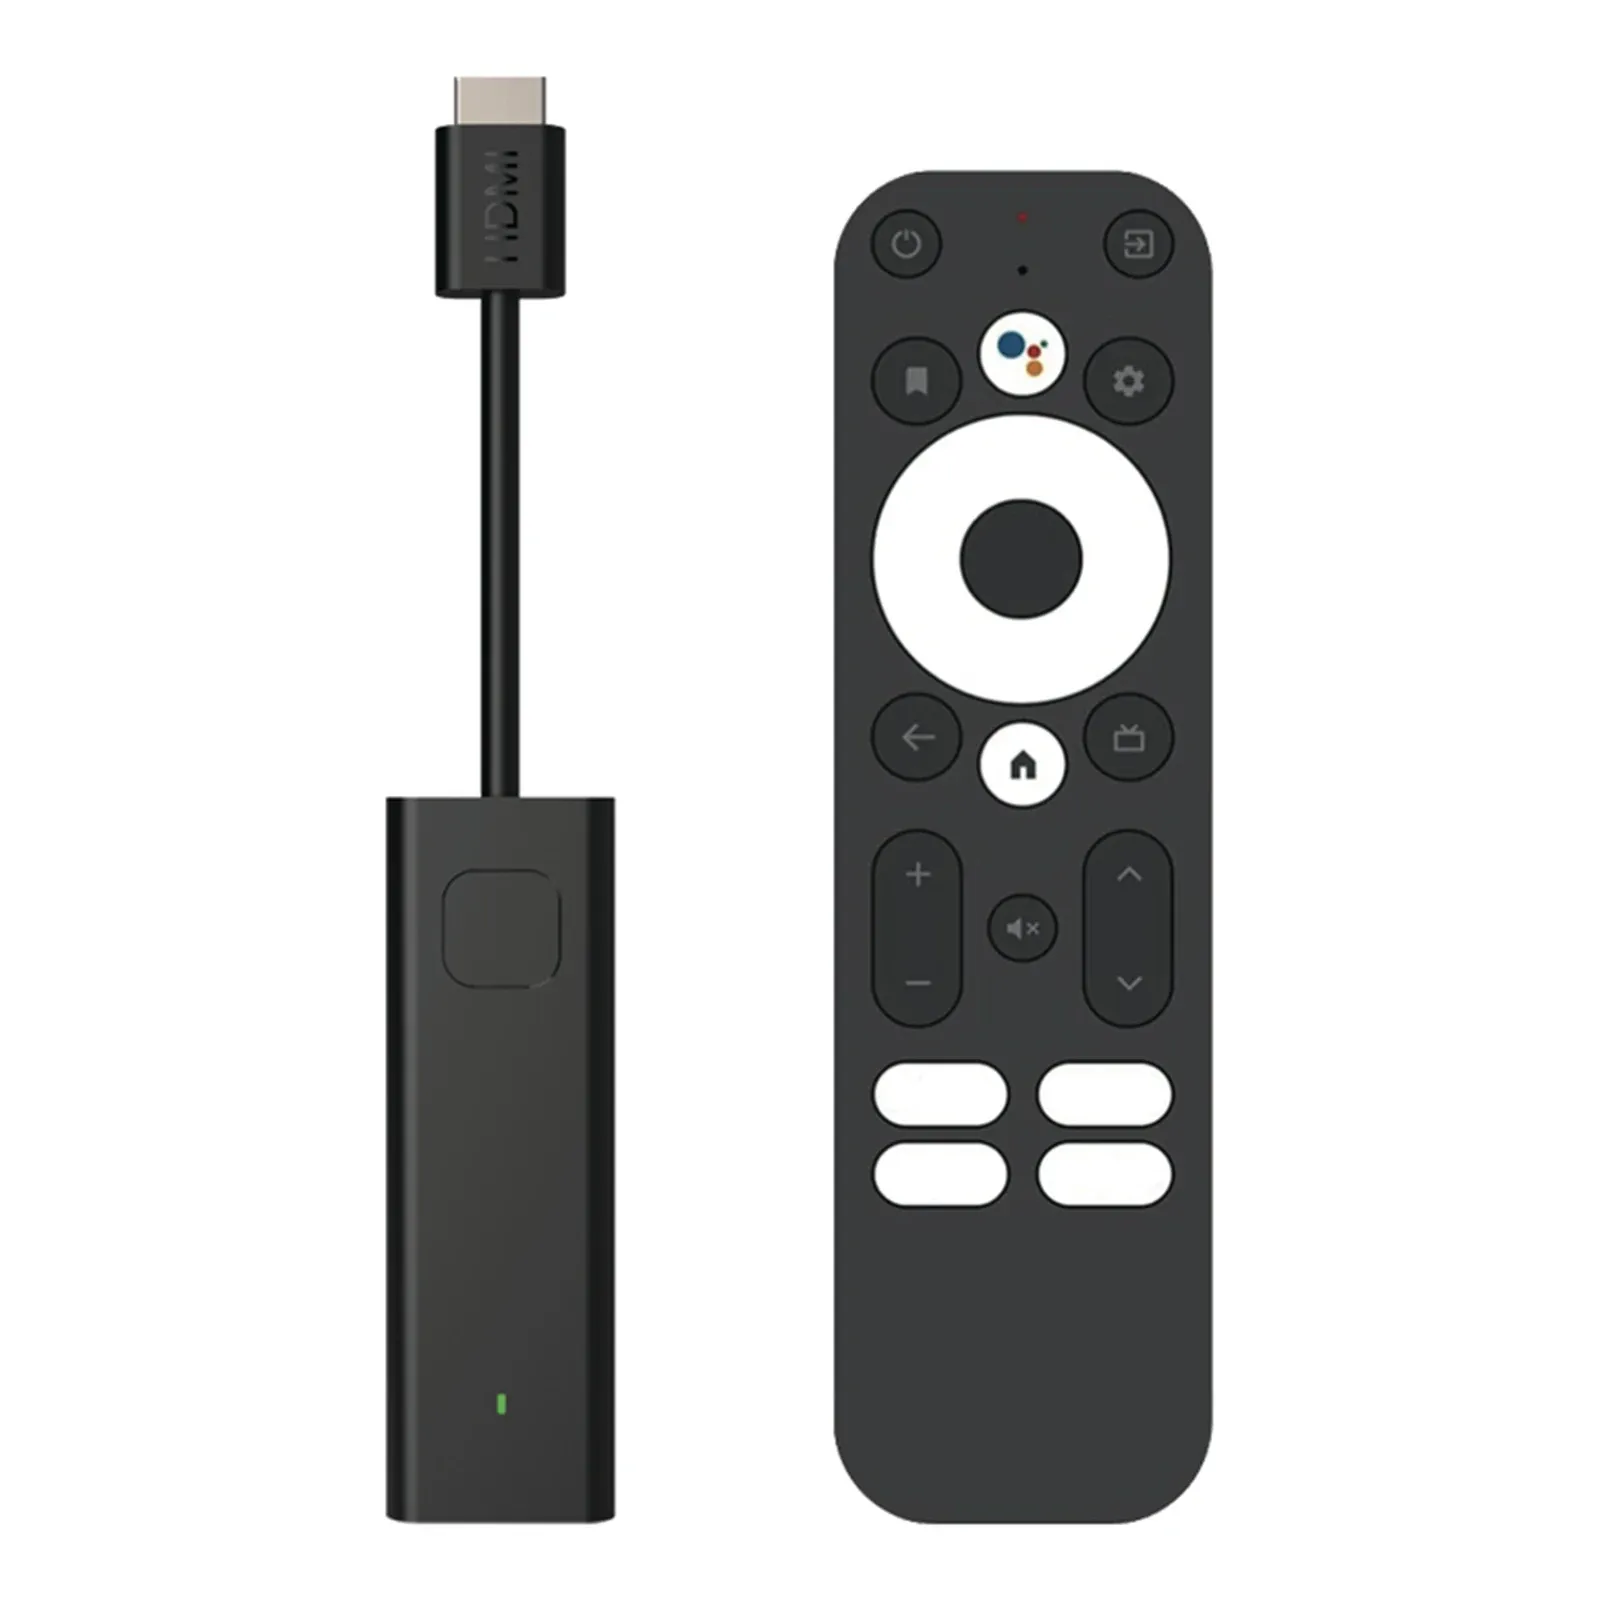 Box TV Stick Low Power Performance Builtin Chromecast 4K Streaming Support Latest Android 11 OS Voice Control for Home and Business